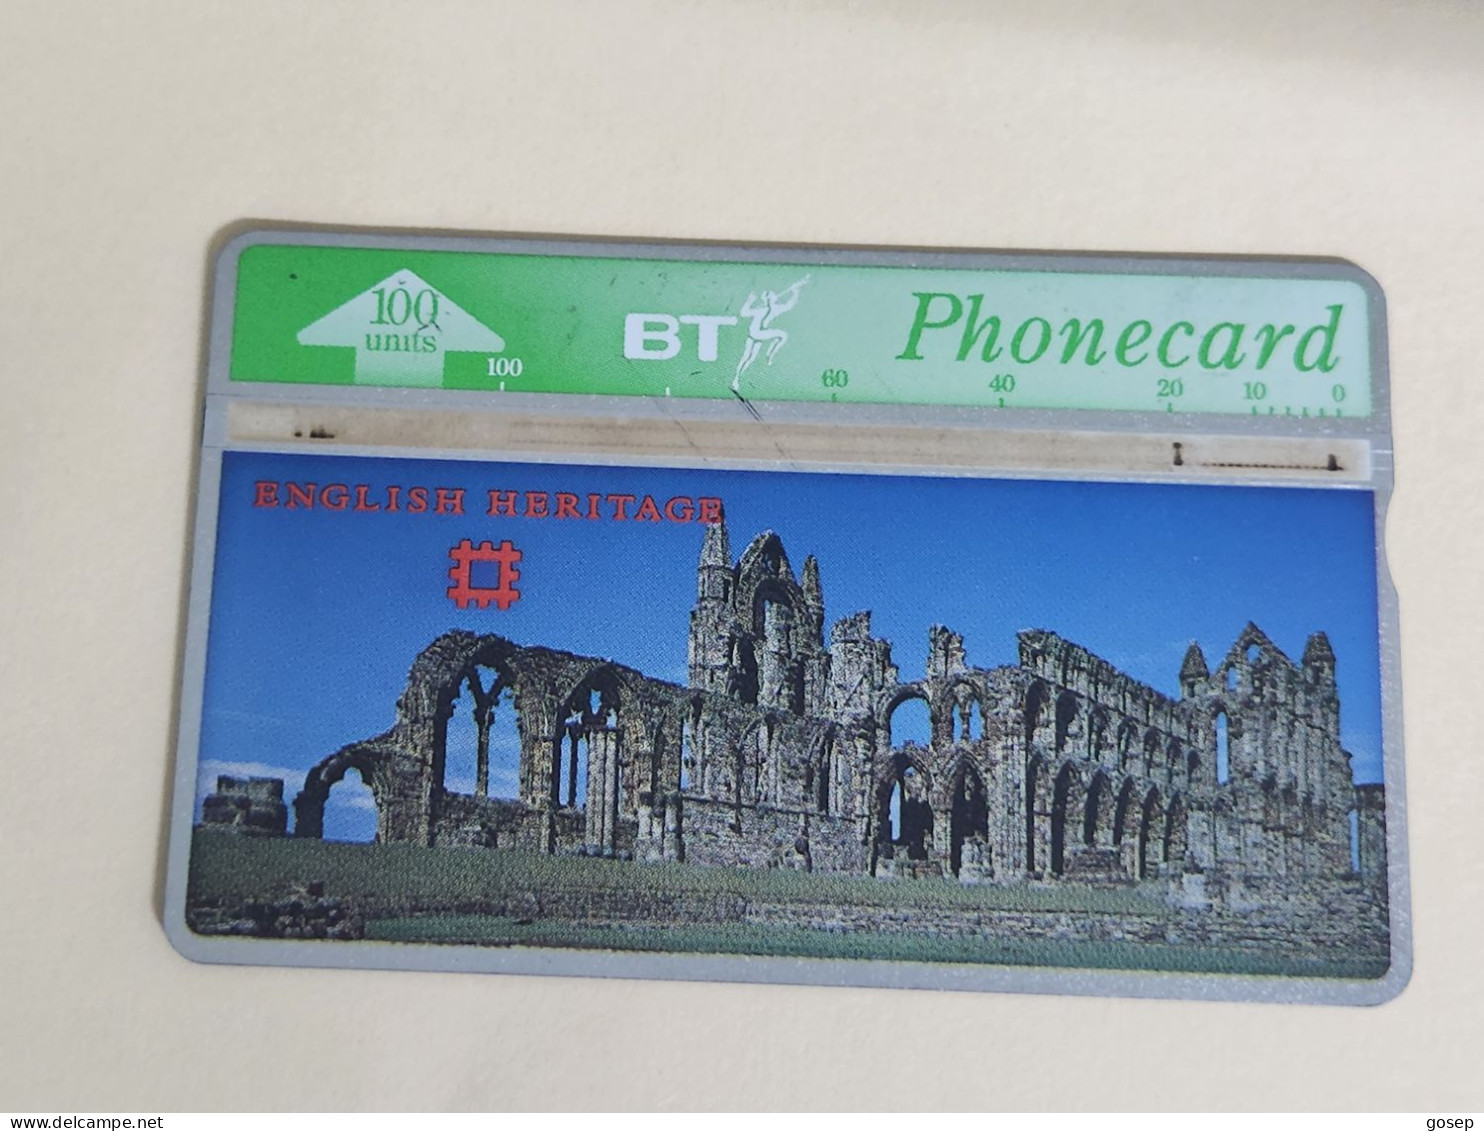 United Kingdom-(BTA122)-HERITAGE-Whitby Abbey-(213)(100units)(527G31289)price Cataloge3.00£-used+1card Prepiad Free - BT Advertising Issues